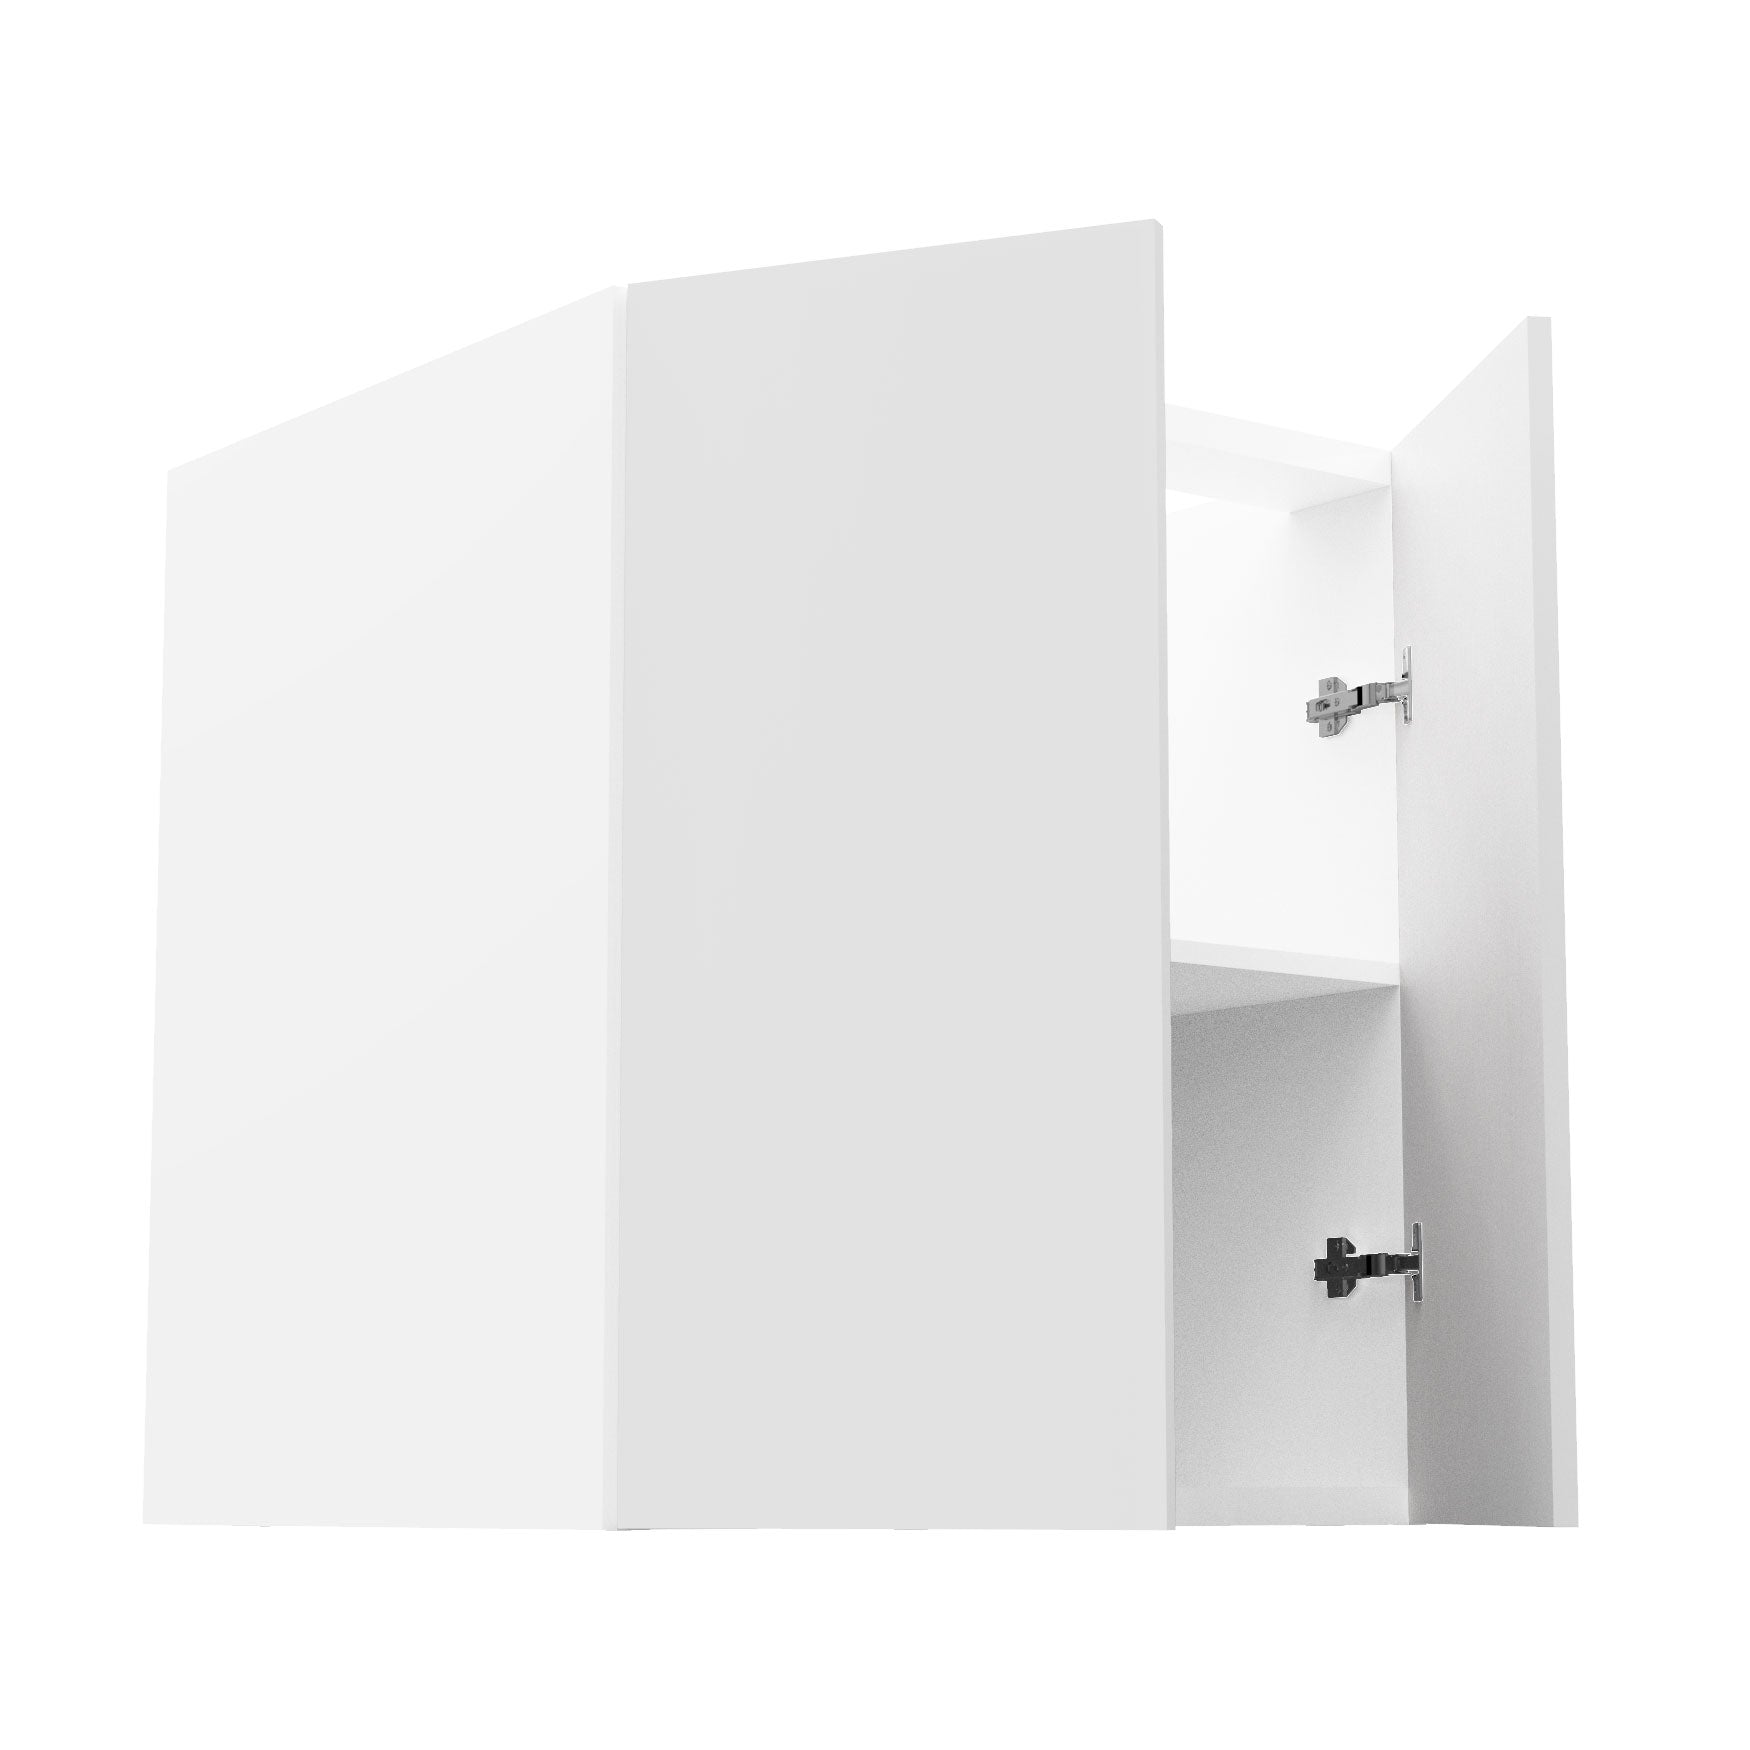 RTA - Glossy White - Full Height Double Door Base Cabinets | 27"W x 30"H x 23.8"D